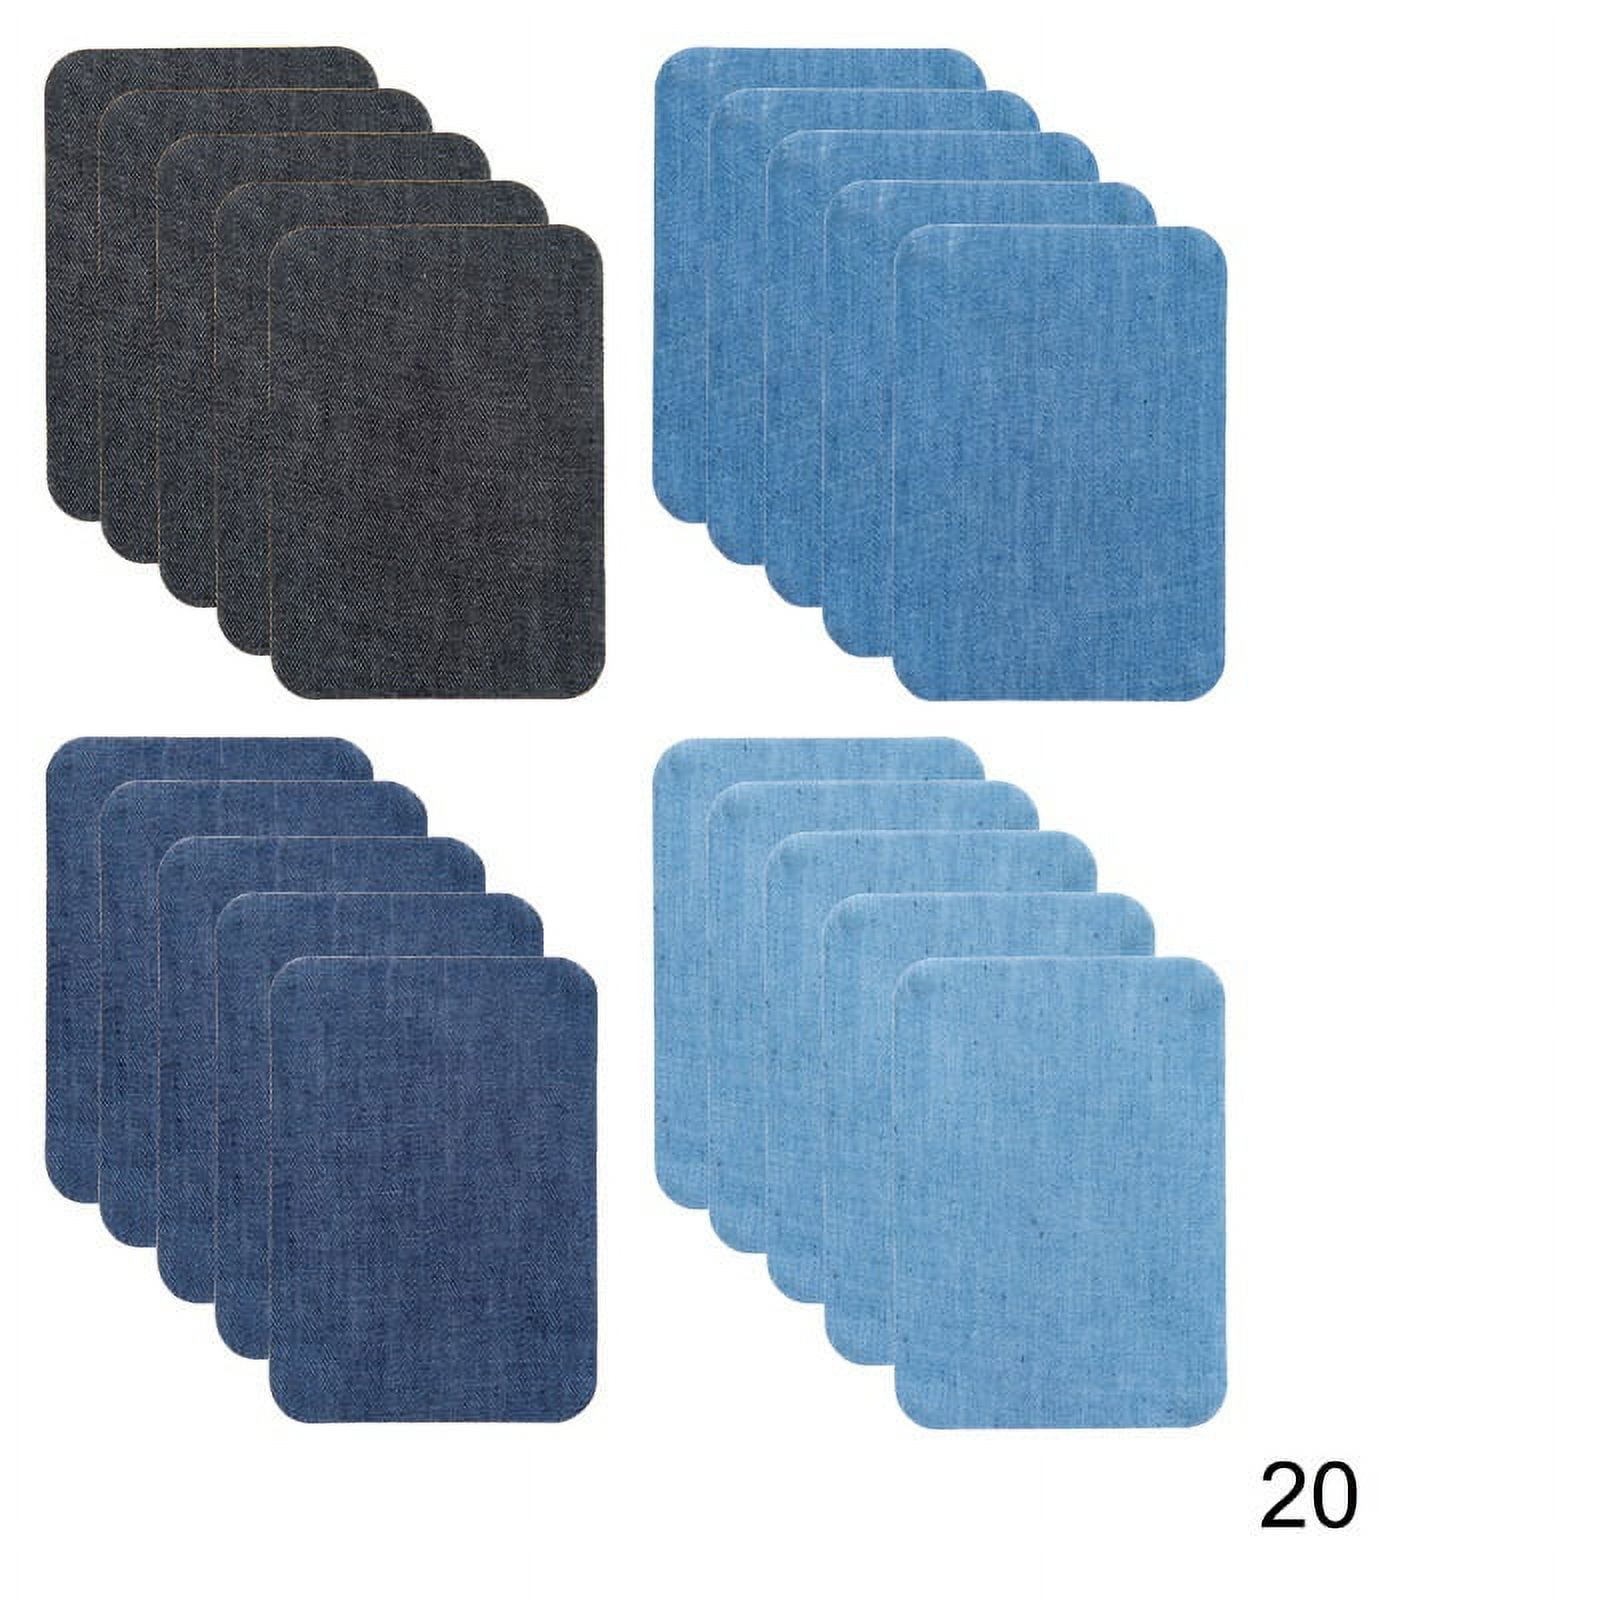 CAREGY Denim Iron on Patches for Jeans Inside & Outside, 4 Shades Jean  Patches Repair Decorating Kit 36PCS Iron on Patch Size 3 by 4-1/4 (7.6 cm  x